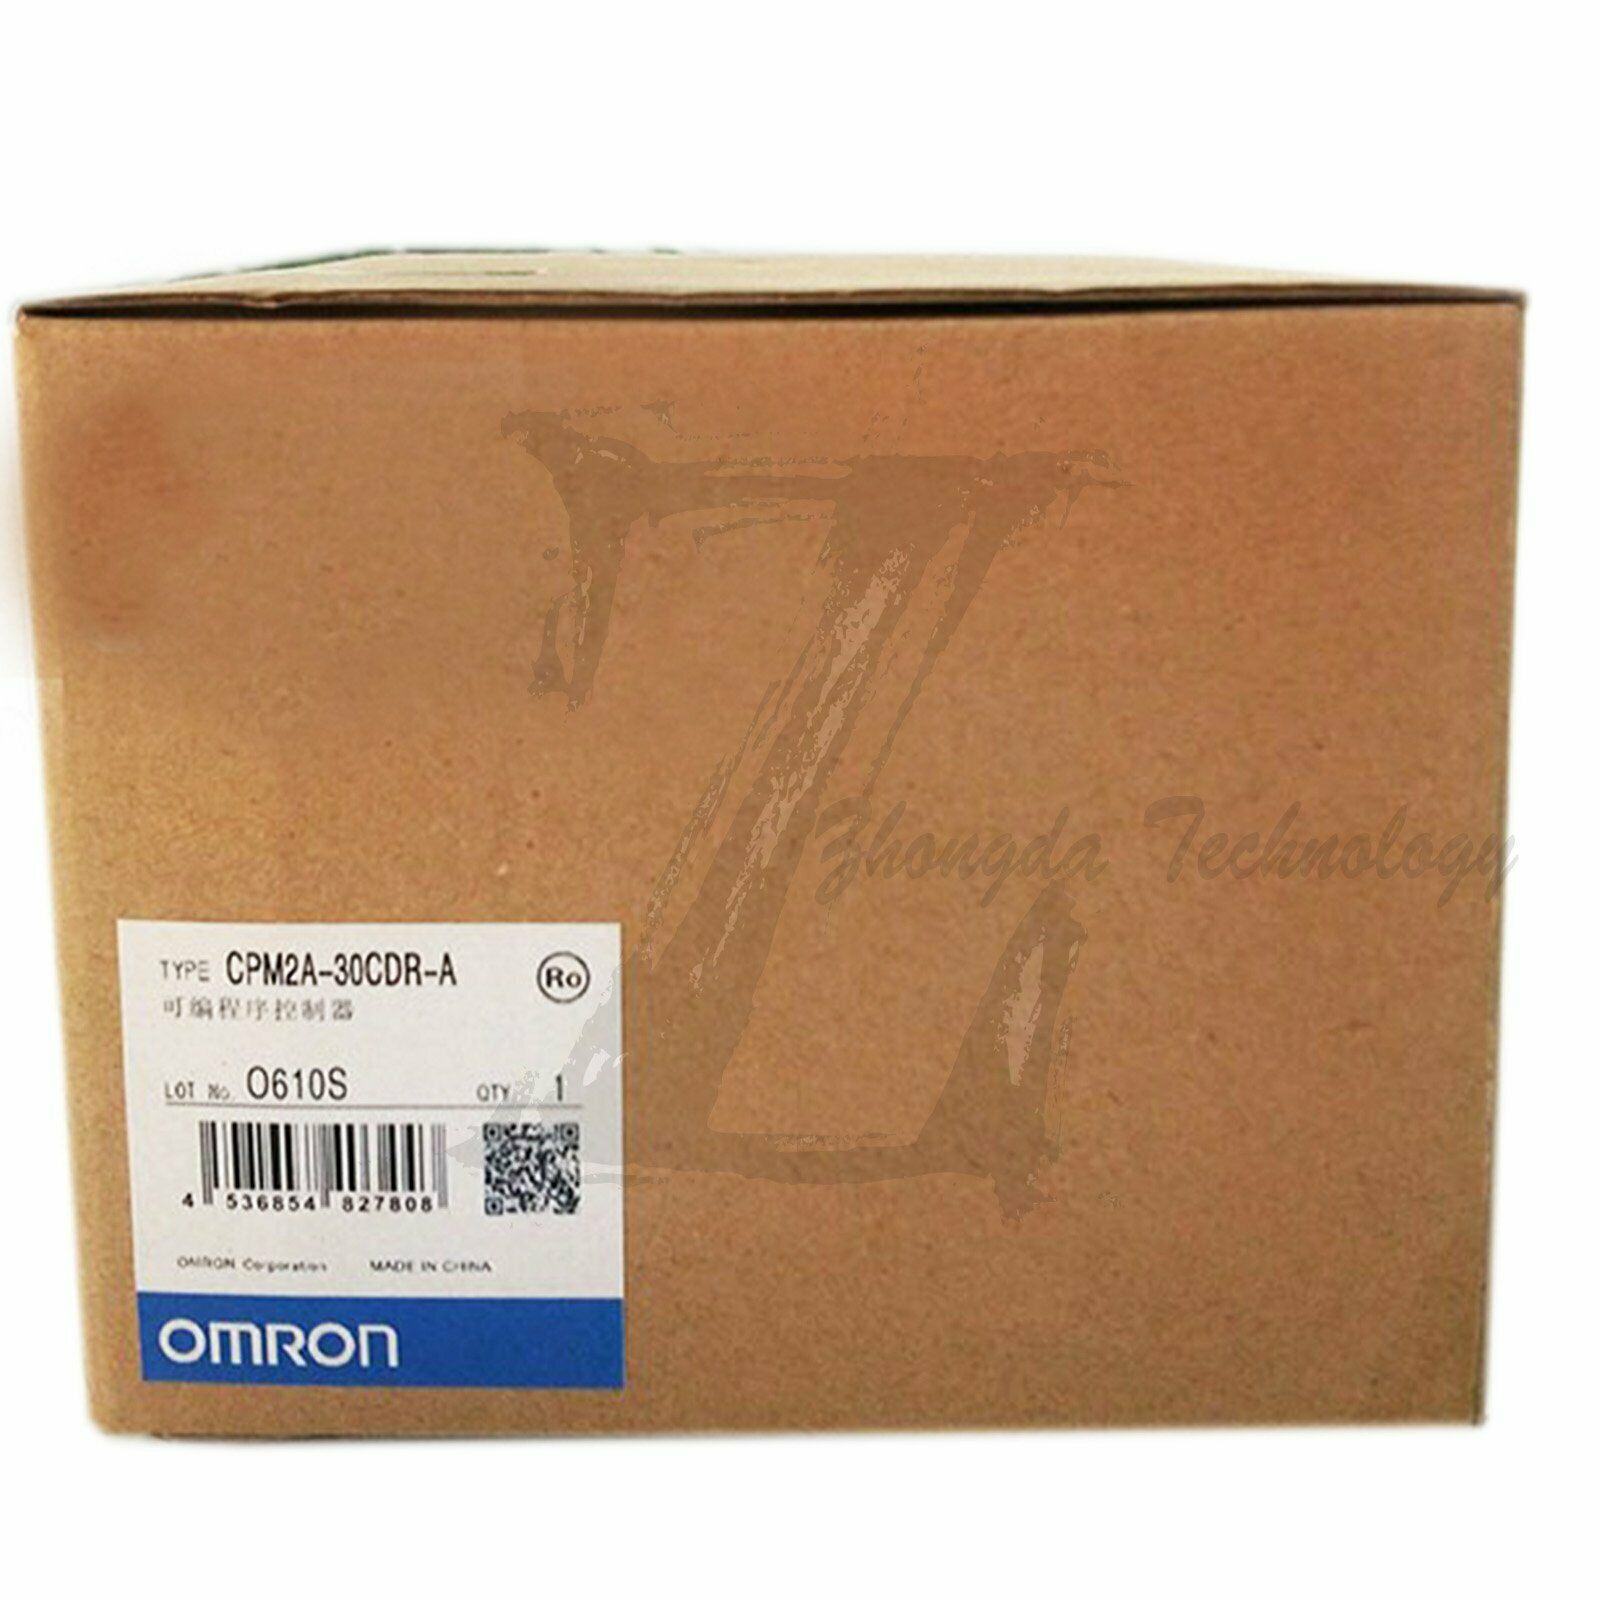 1Pc new Omron CPM2A-30CDR-A PLC programmable controller one year warranty KOEED 101-200, 80%, import_2020_10_10_031751, Omron, Other